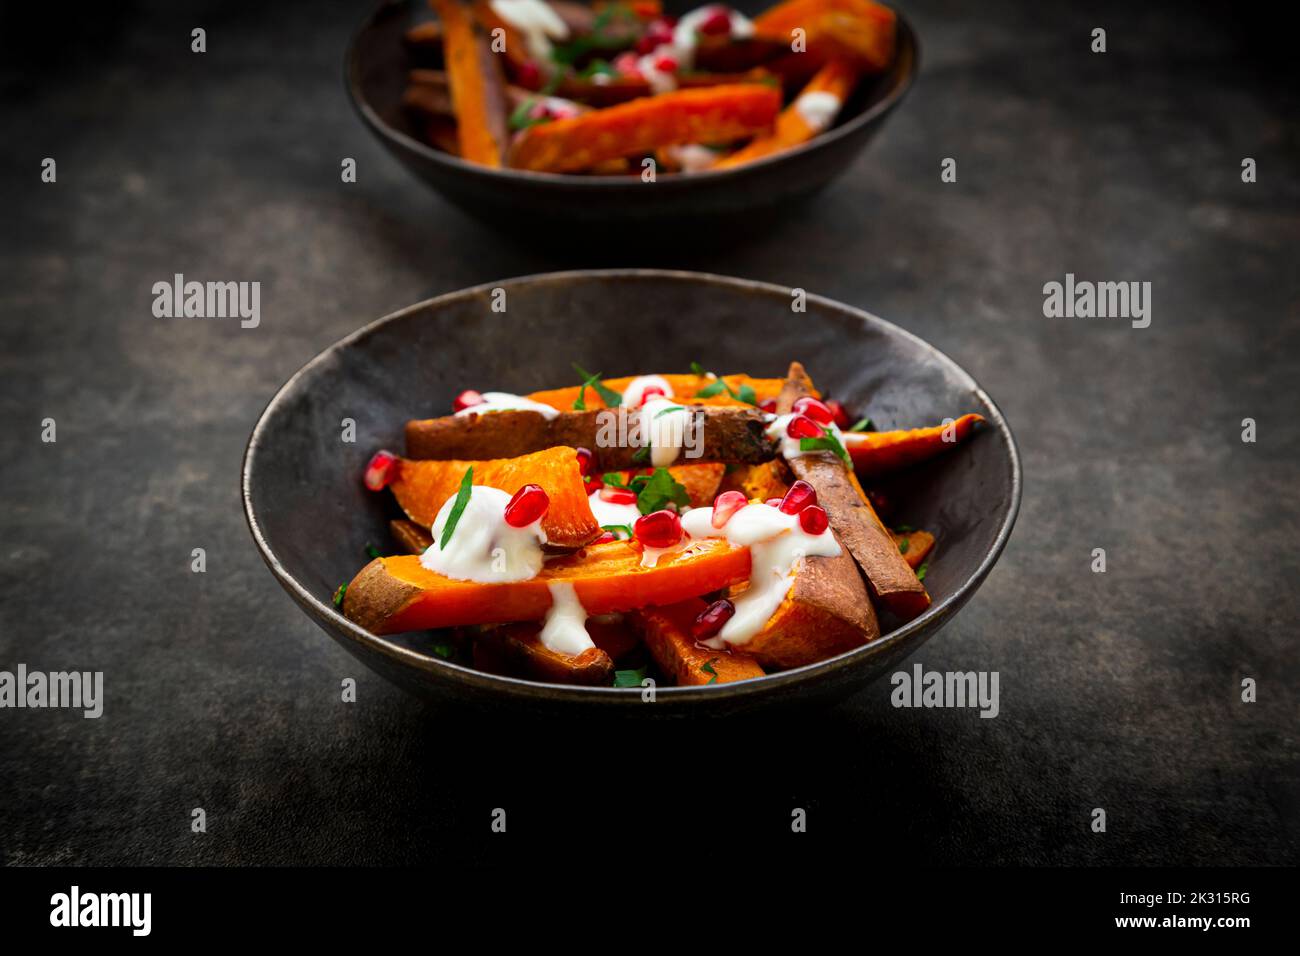 Studio shot of two bowls of sweet potatoes with parsley, pomegranate seeds and yogurt sauce Stock Photo